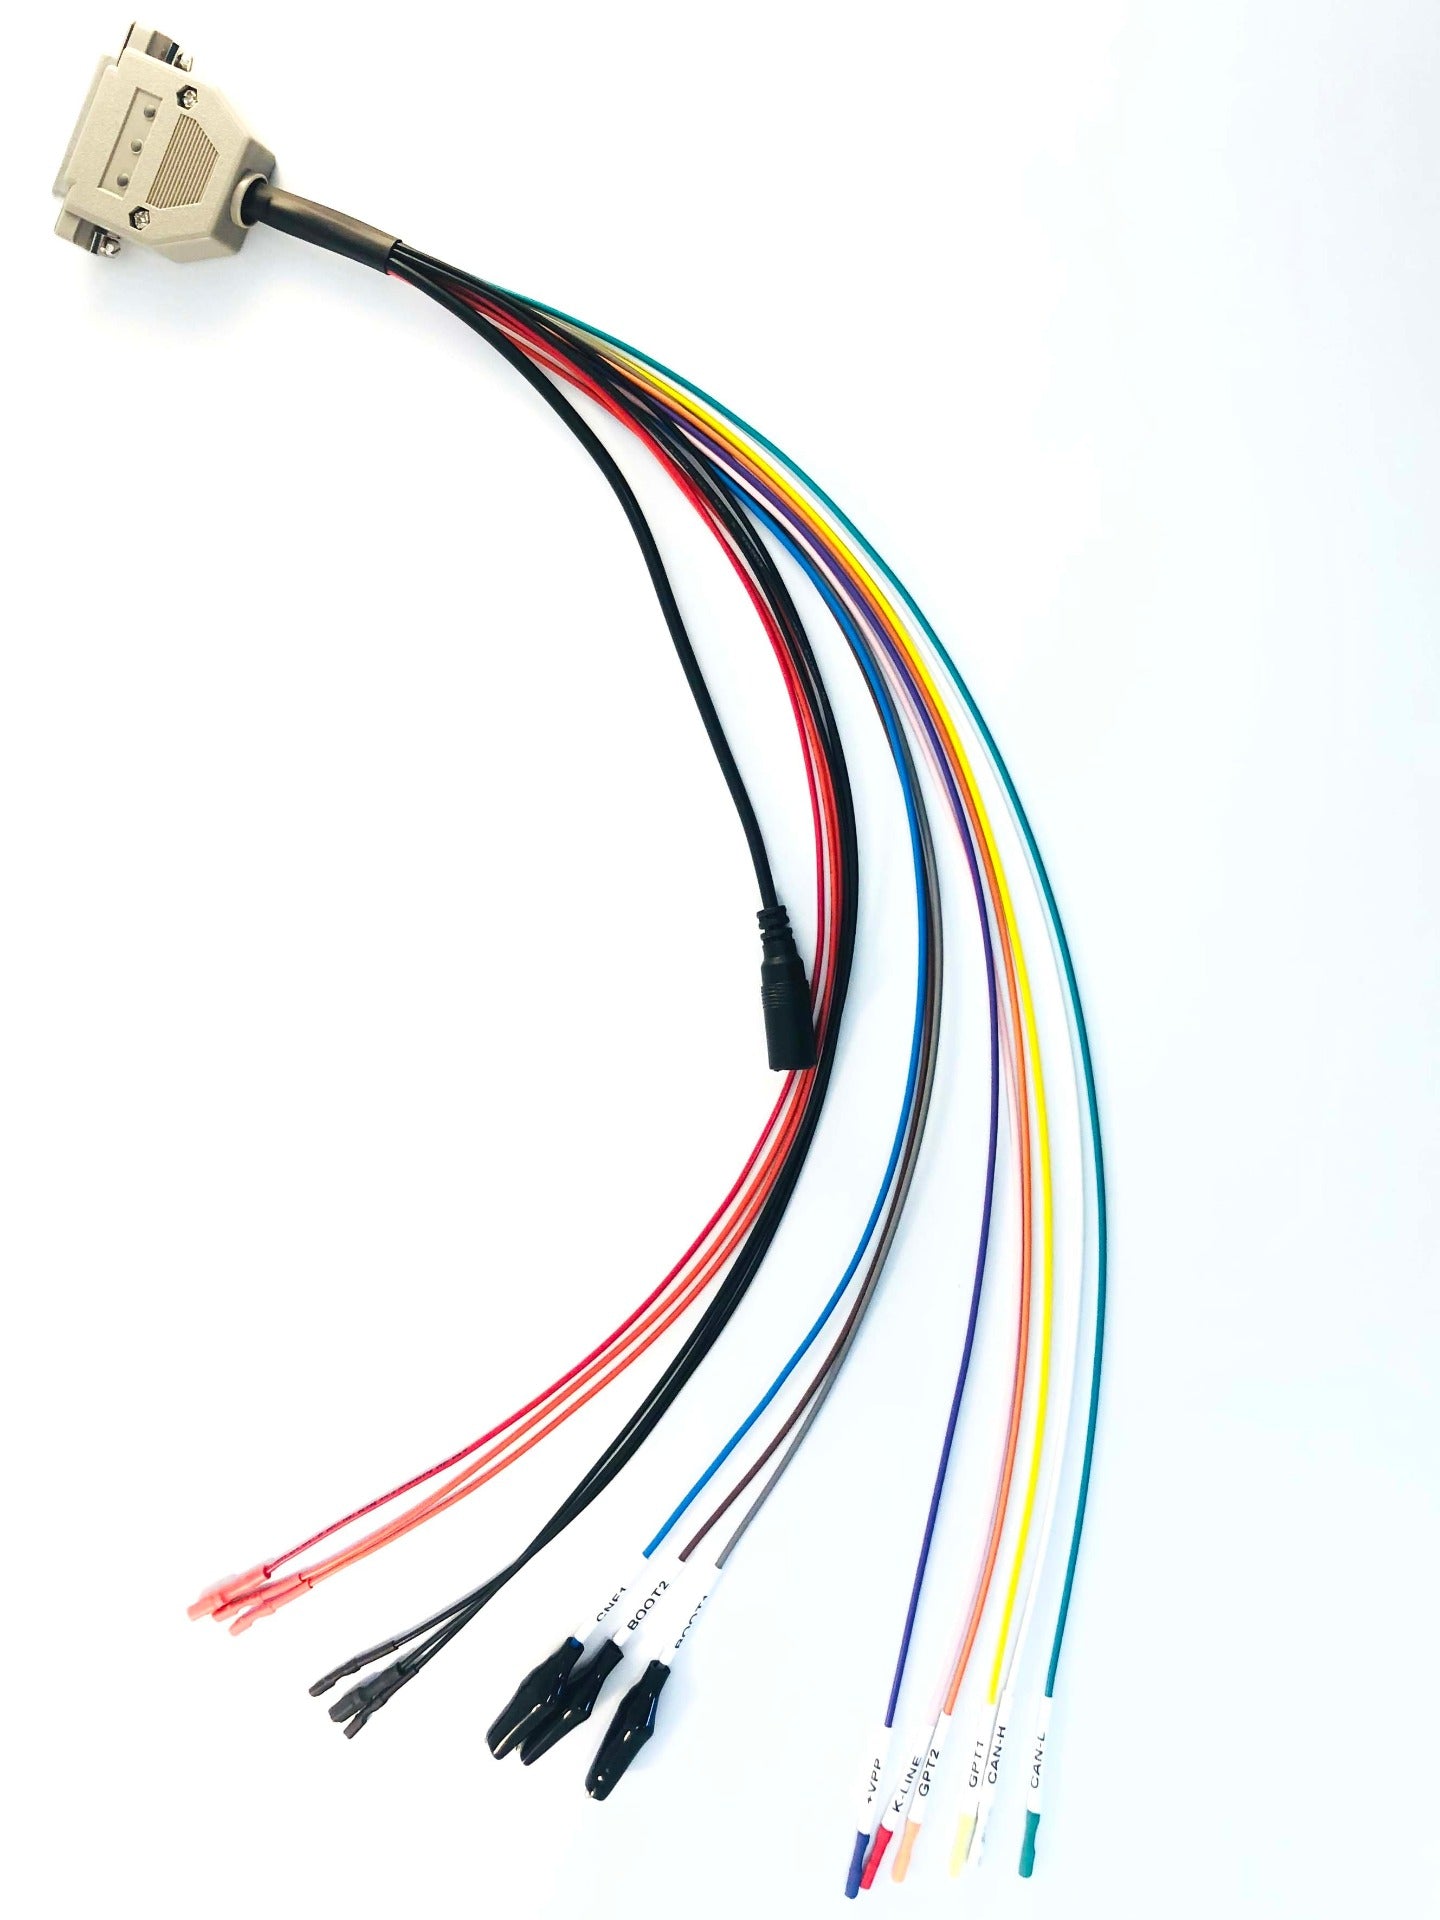 Scanmatik 2 Pro and PCMFlash Scanmatik 2 Pro Compatible bench flashing cable designed for use with PCMFlash software Modules 53 / 71 / 77 Also compatible with BitBox MG1 and MD1 Bench module